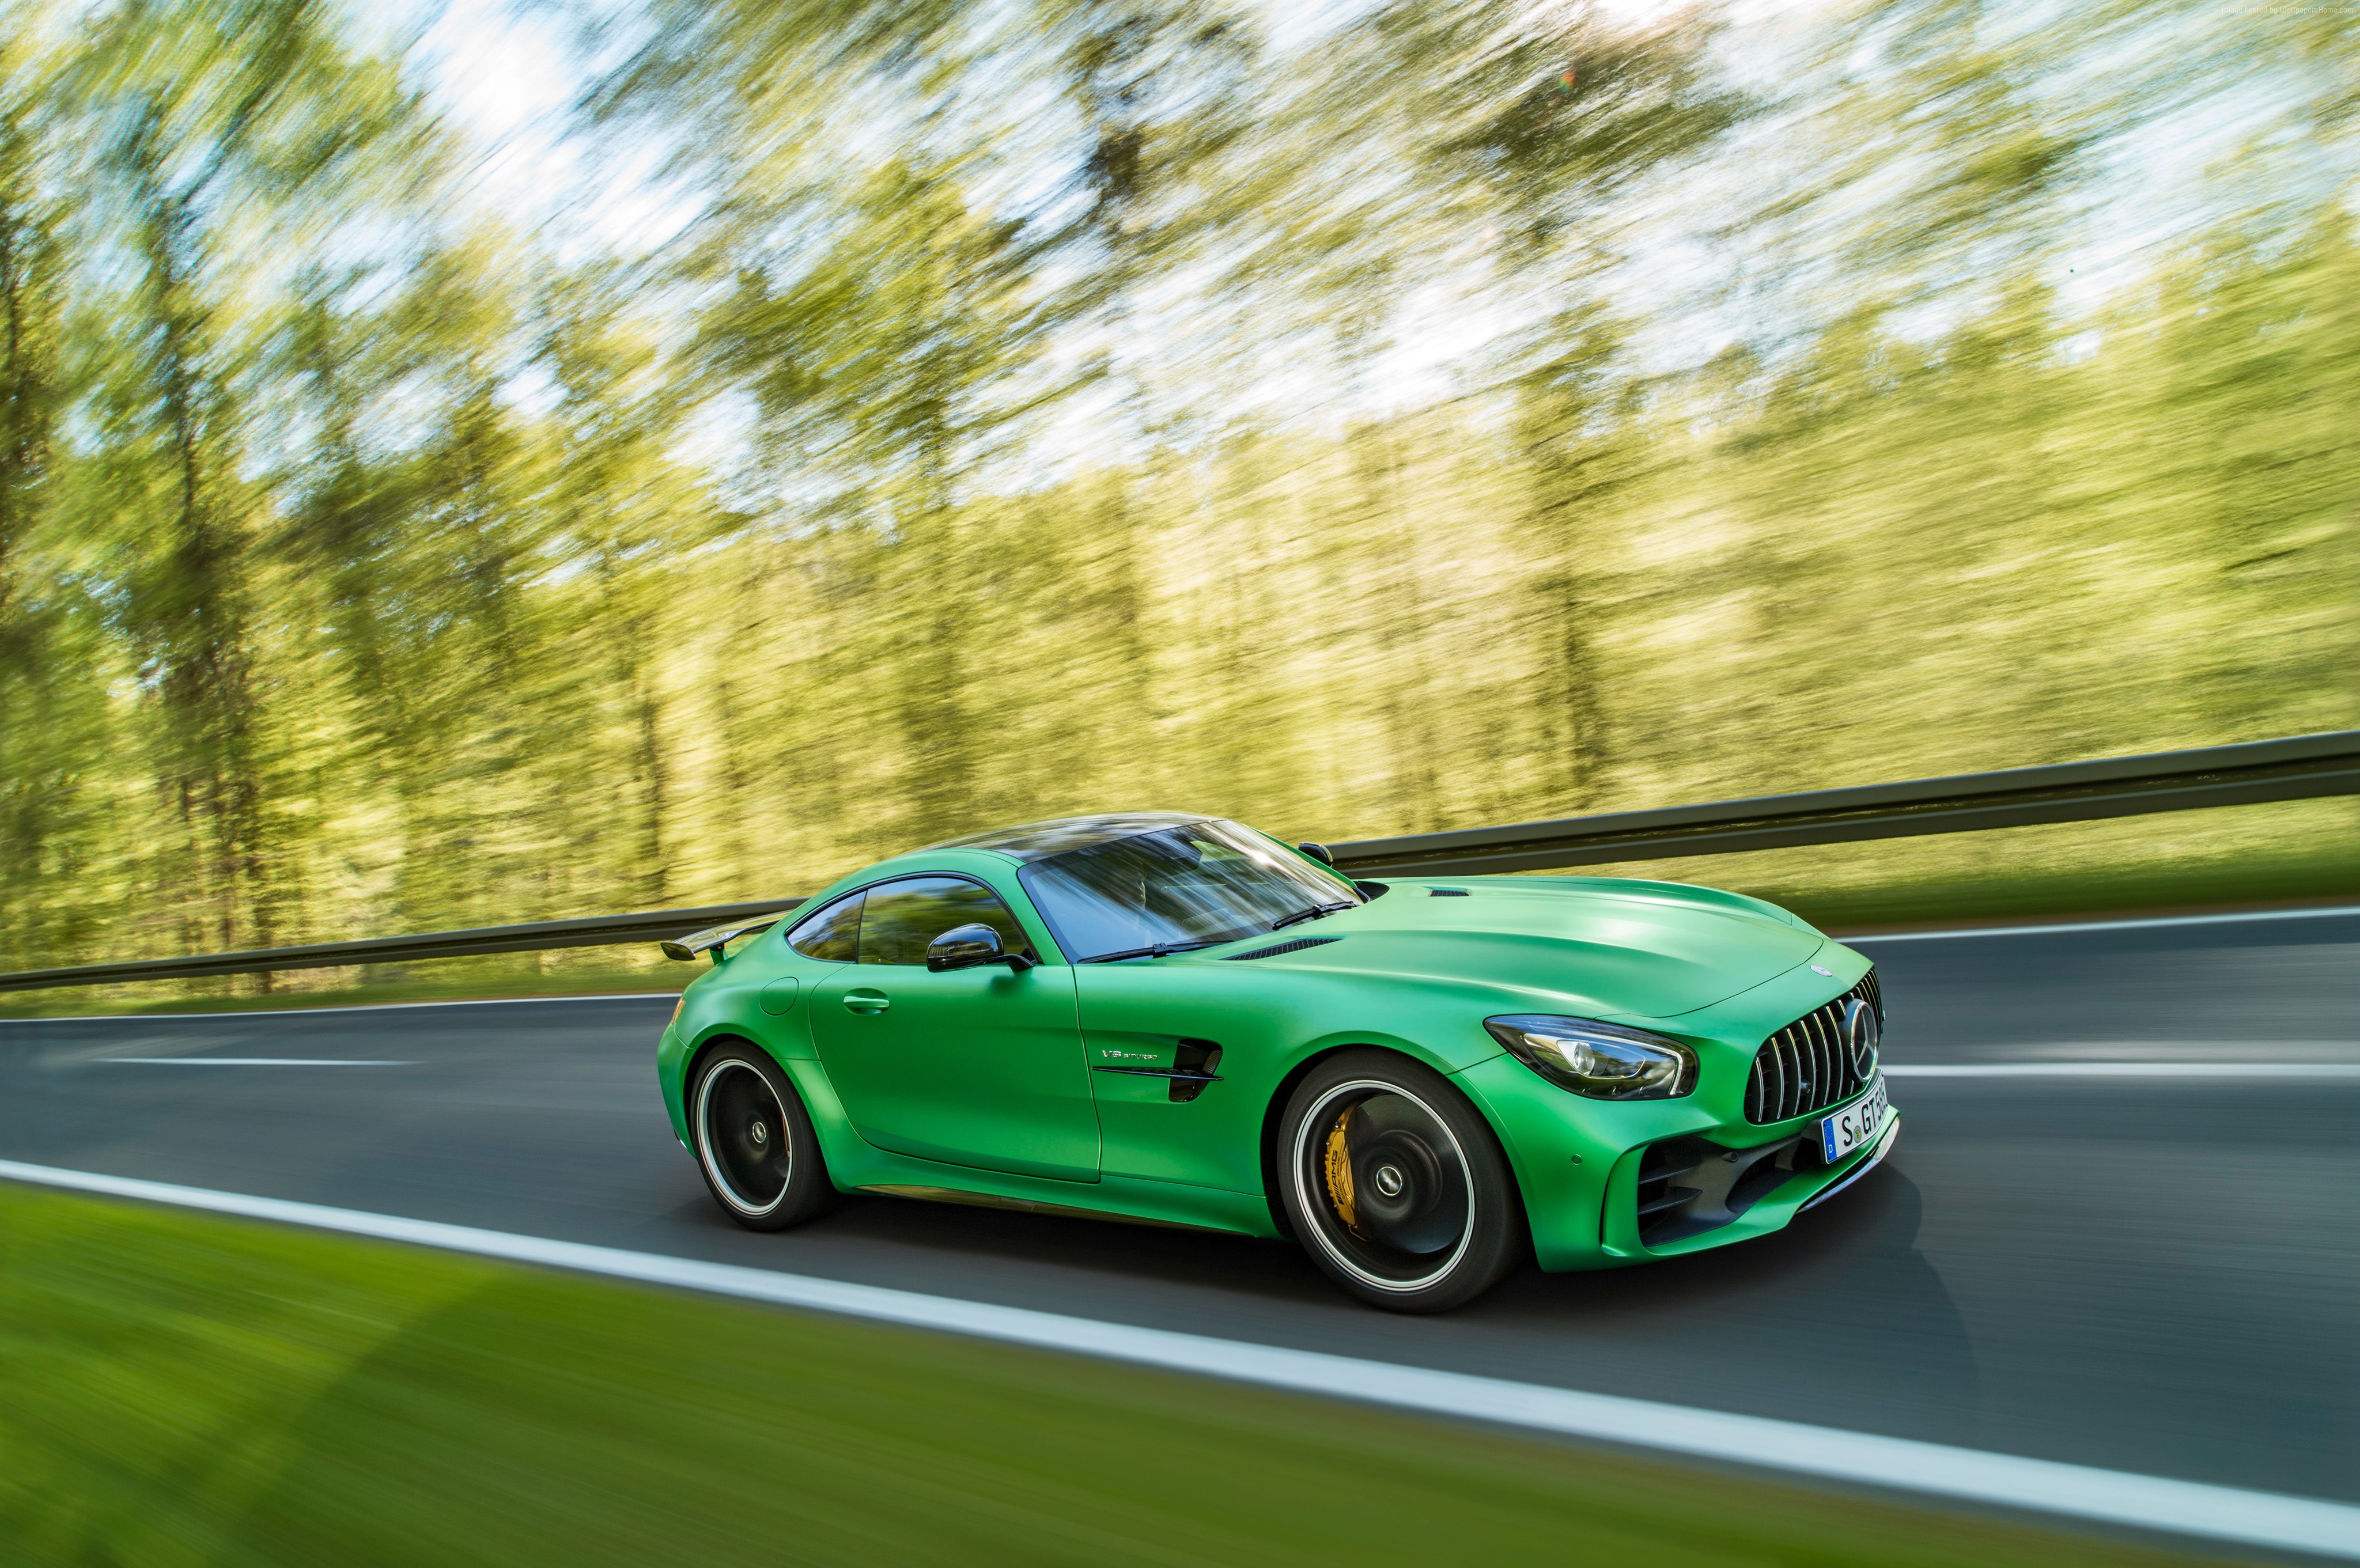 Amg Gt R Backgrounds - HD Wallpaper 